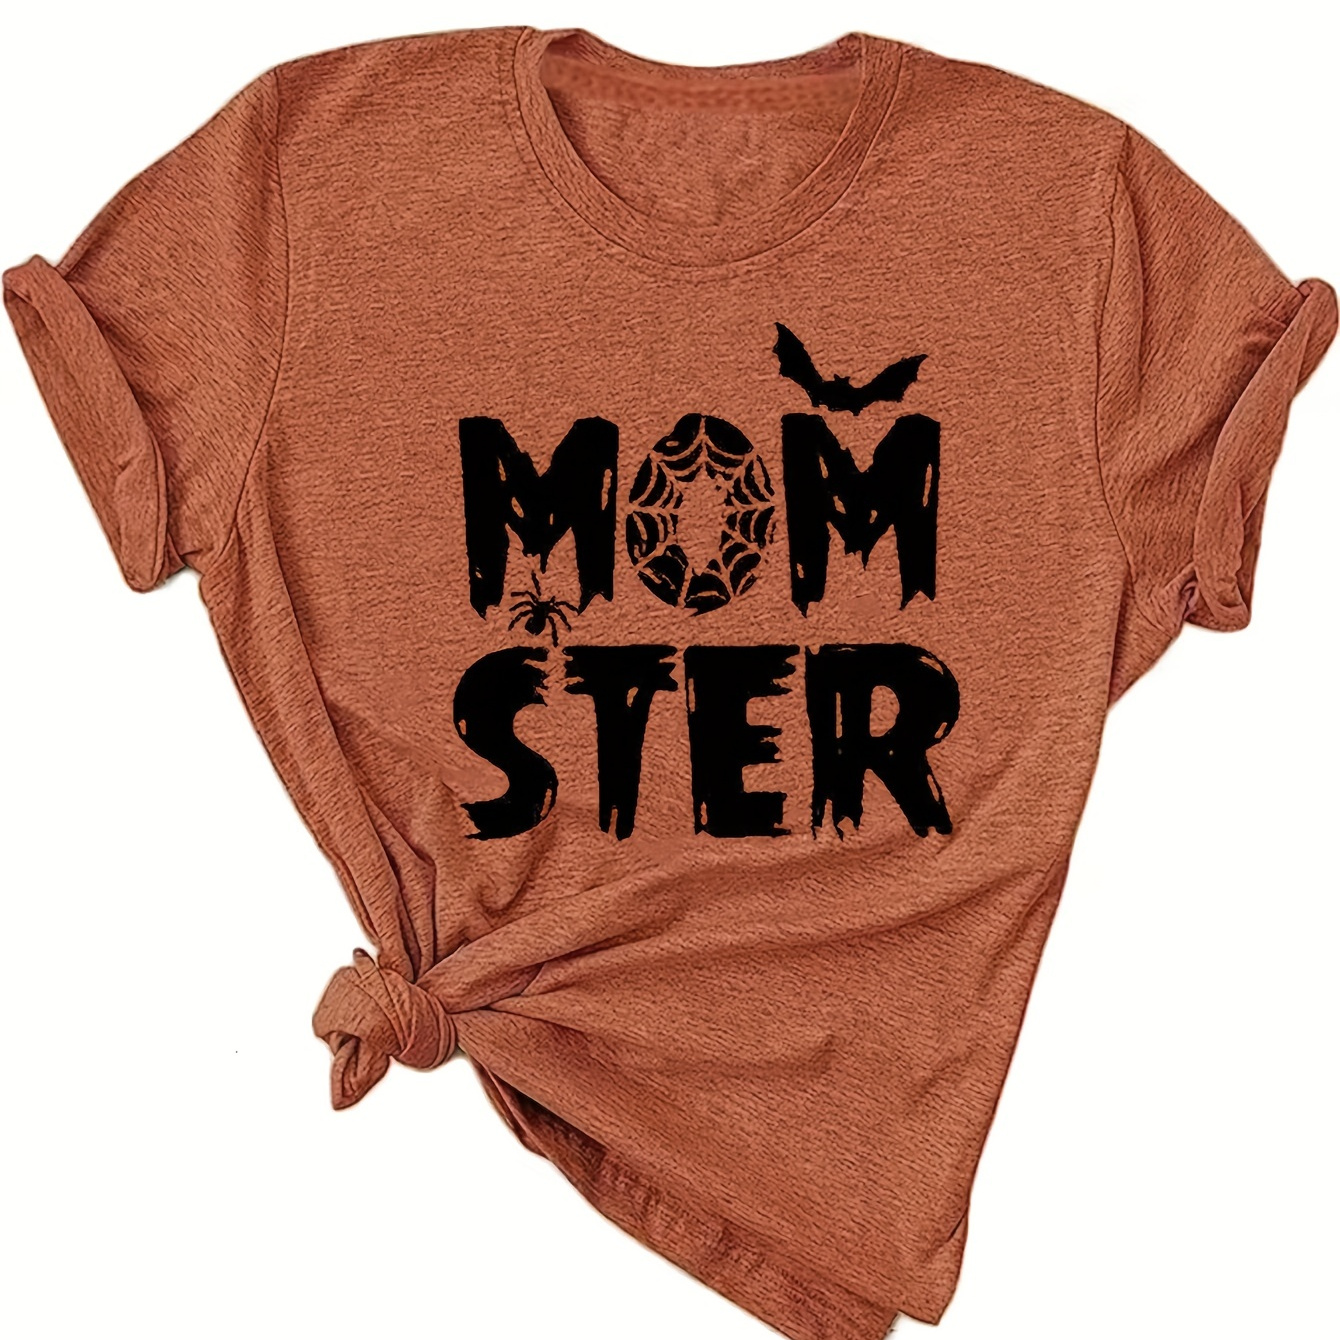 

Mom Ster Print Crew Neck T-shirt, Casual Short Sleeve T-shirt For Spring & Summer, Women's Clothing